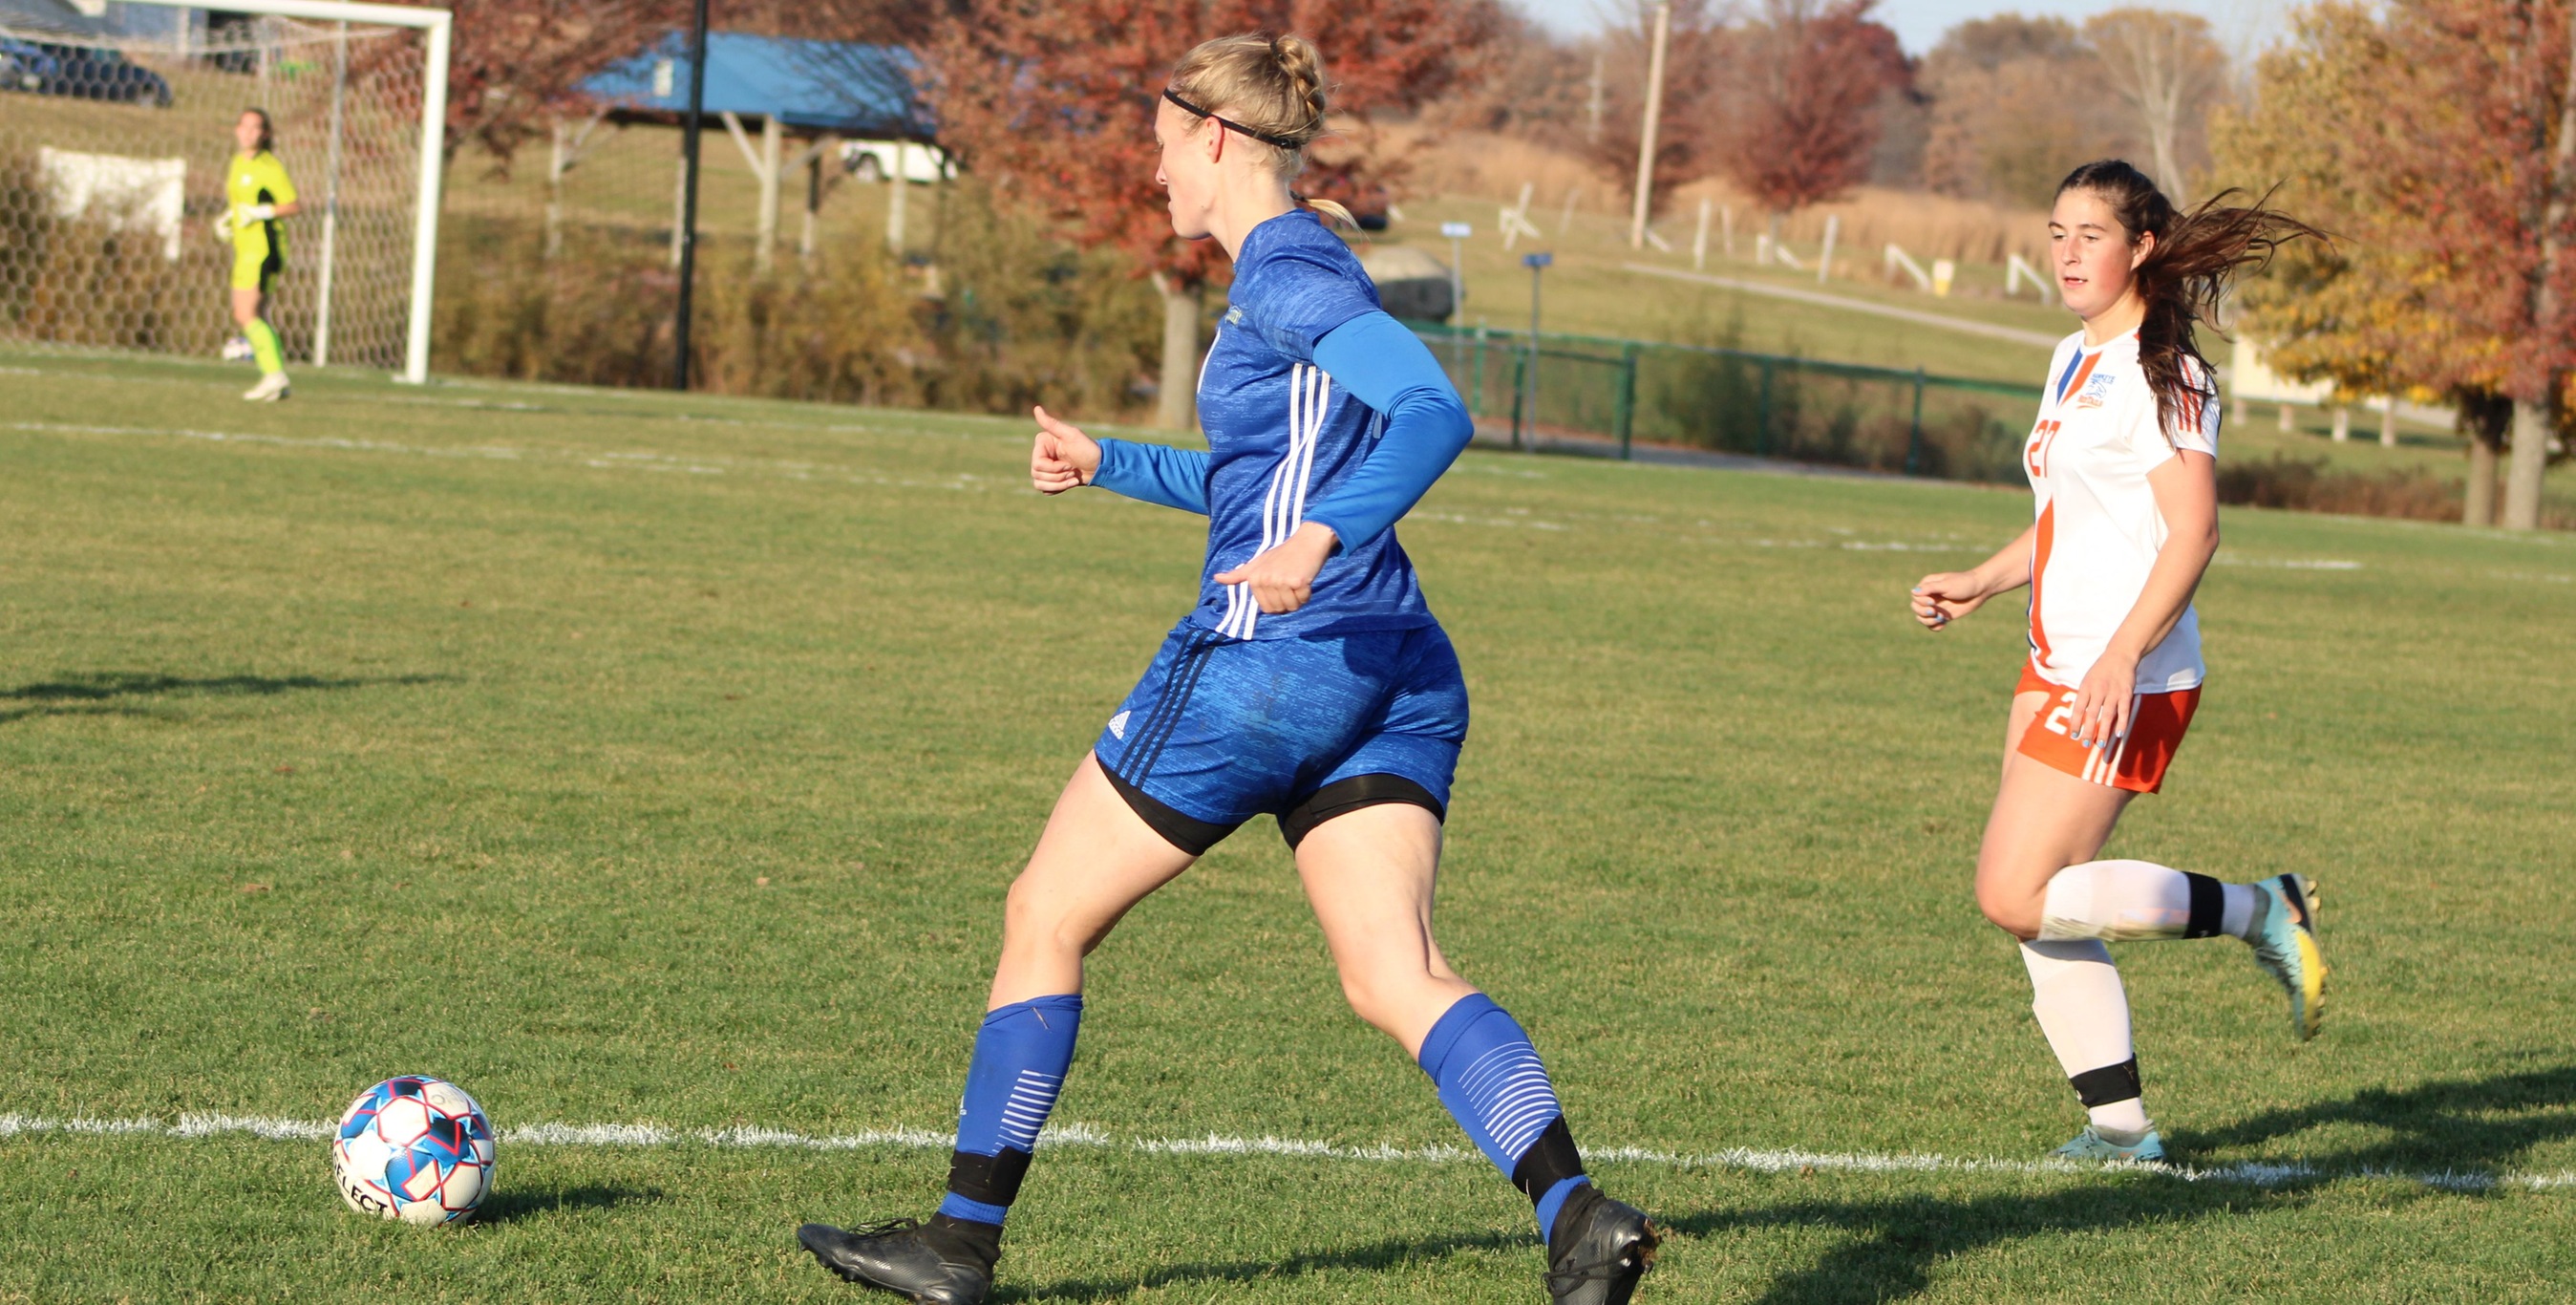 NIACC's Jette Busche was selected as the ICCAC Division II women's soccer player of the week for the week of Oct. 17-23.